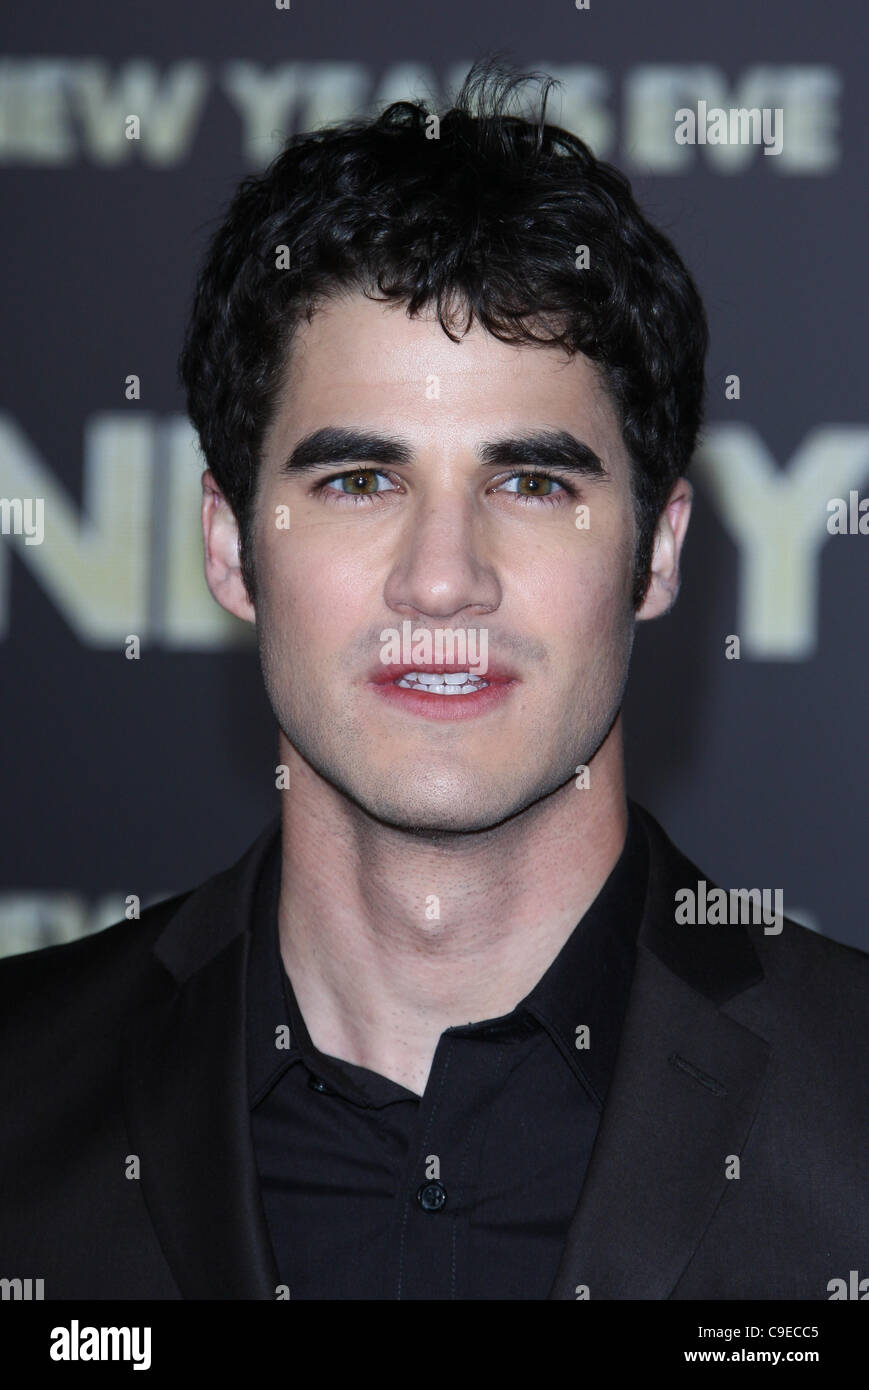 DARREN CRISS NEW YEAR'S EVE. WORLD PREMIERE HOLLYWOOD LOS ANGELES CALIFORNIA USA 05 December 2011 Stock Photo